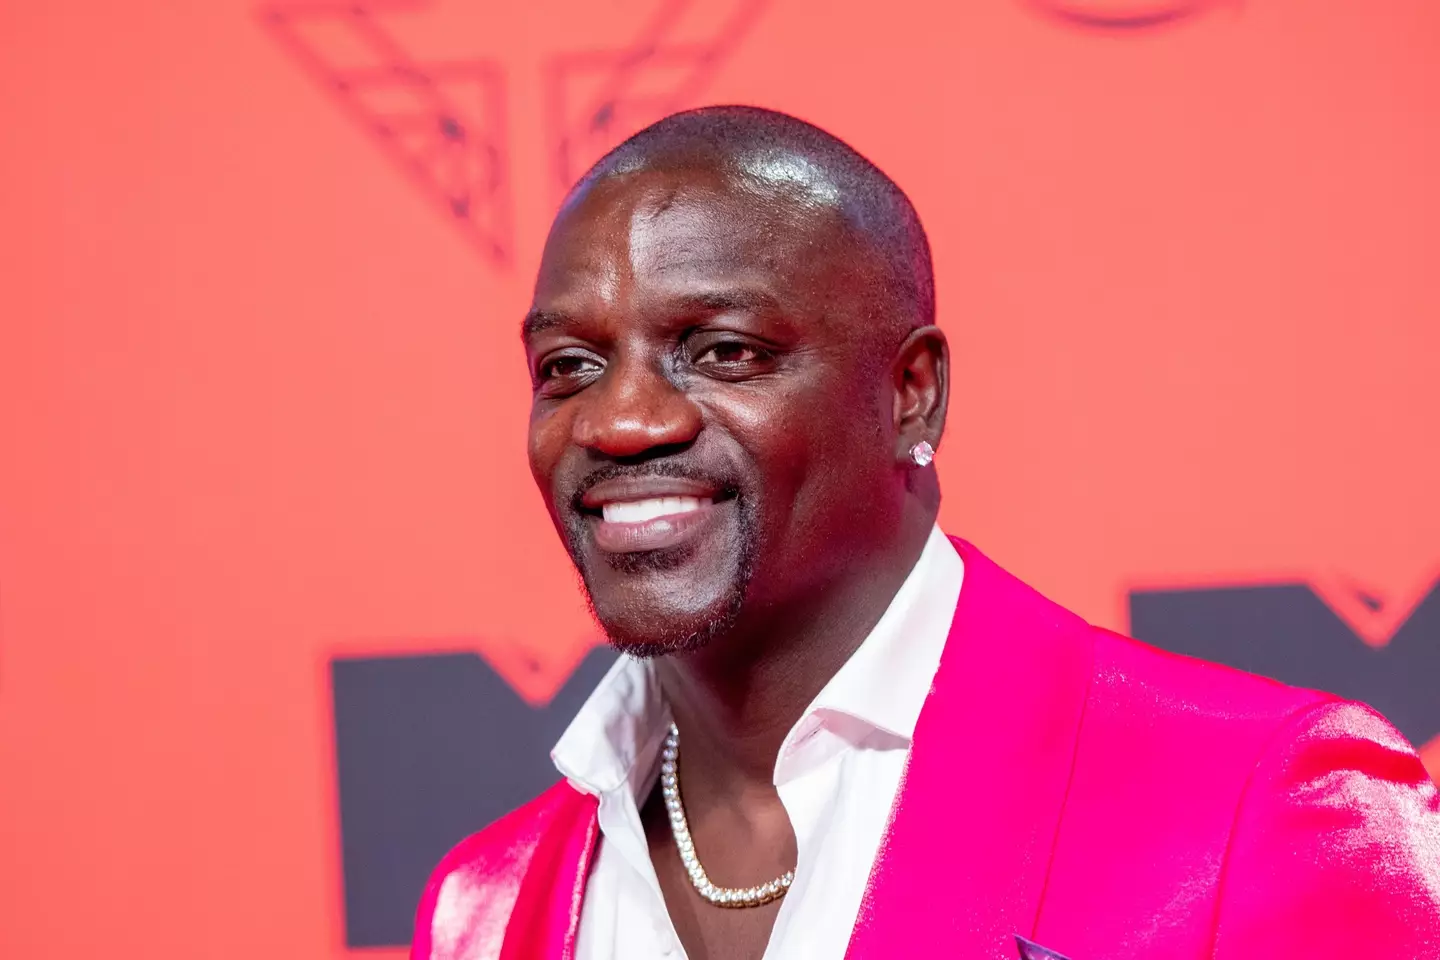 Akon revealed that his brother was used as a body double when he was overbooked on shows.